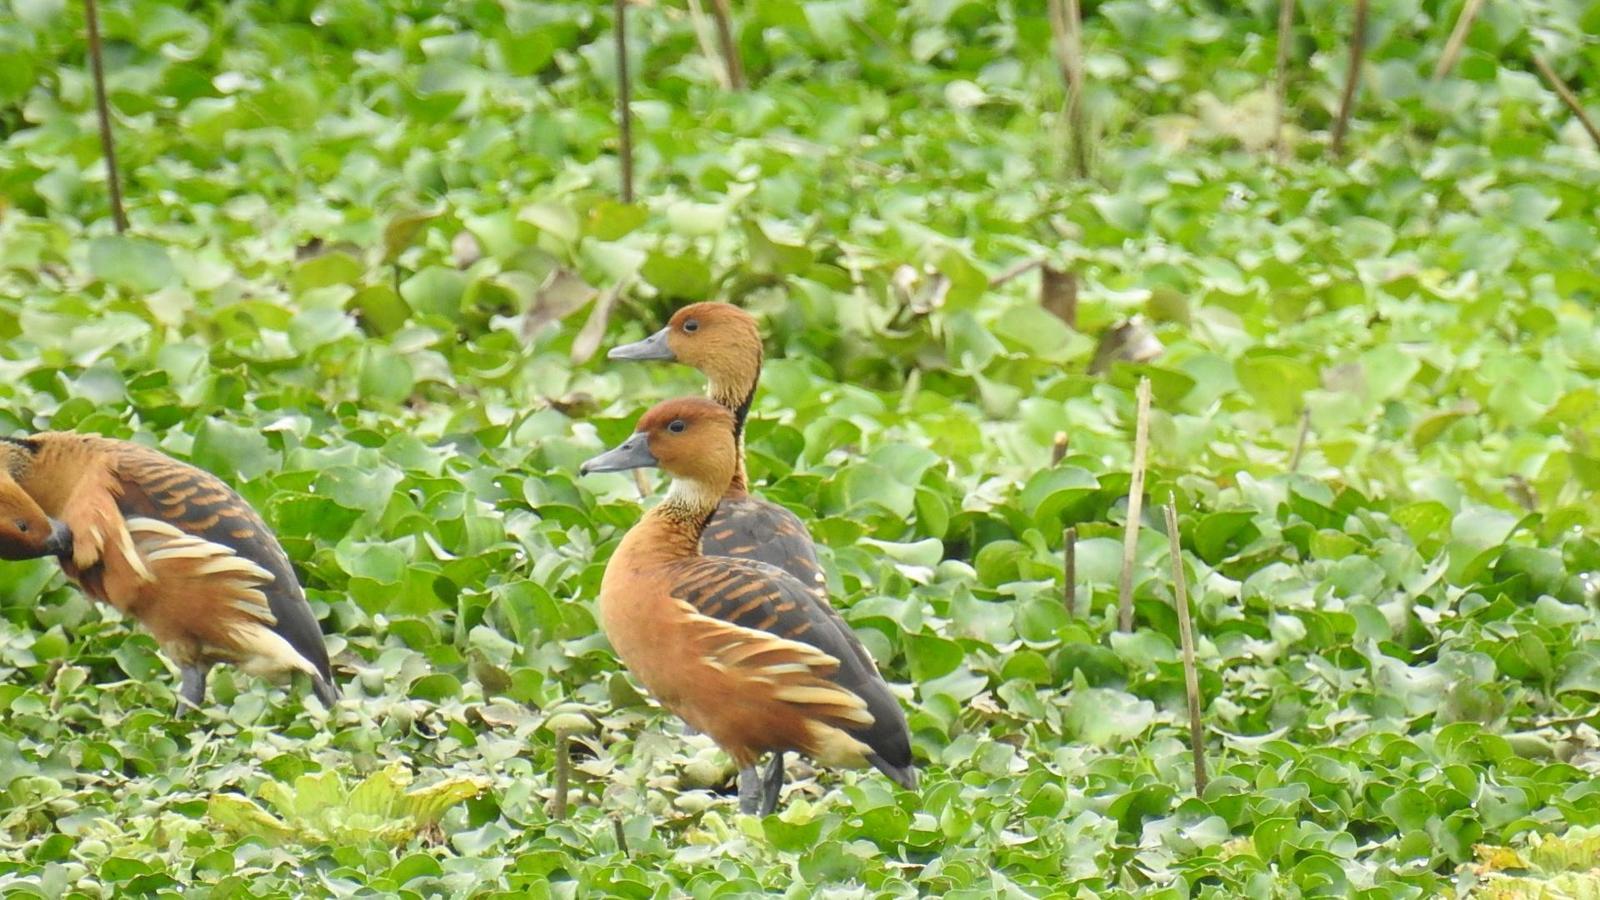 Fulvous Whistling-Duck Photo by Julio Delgado